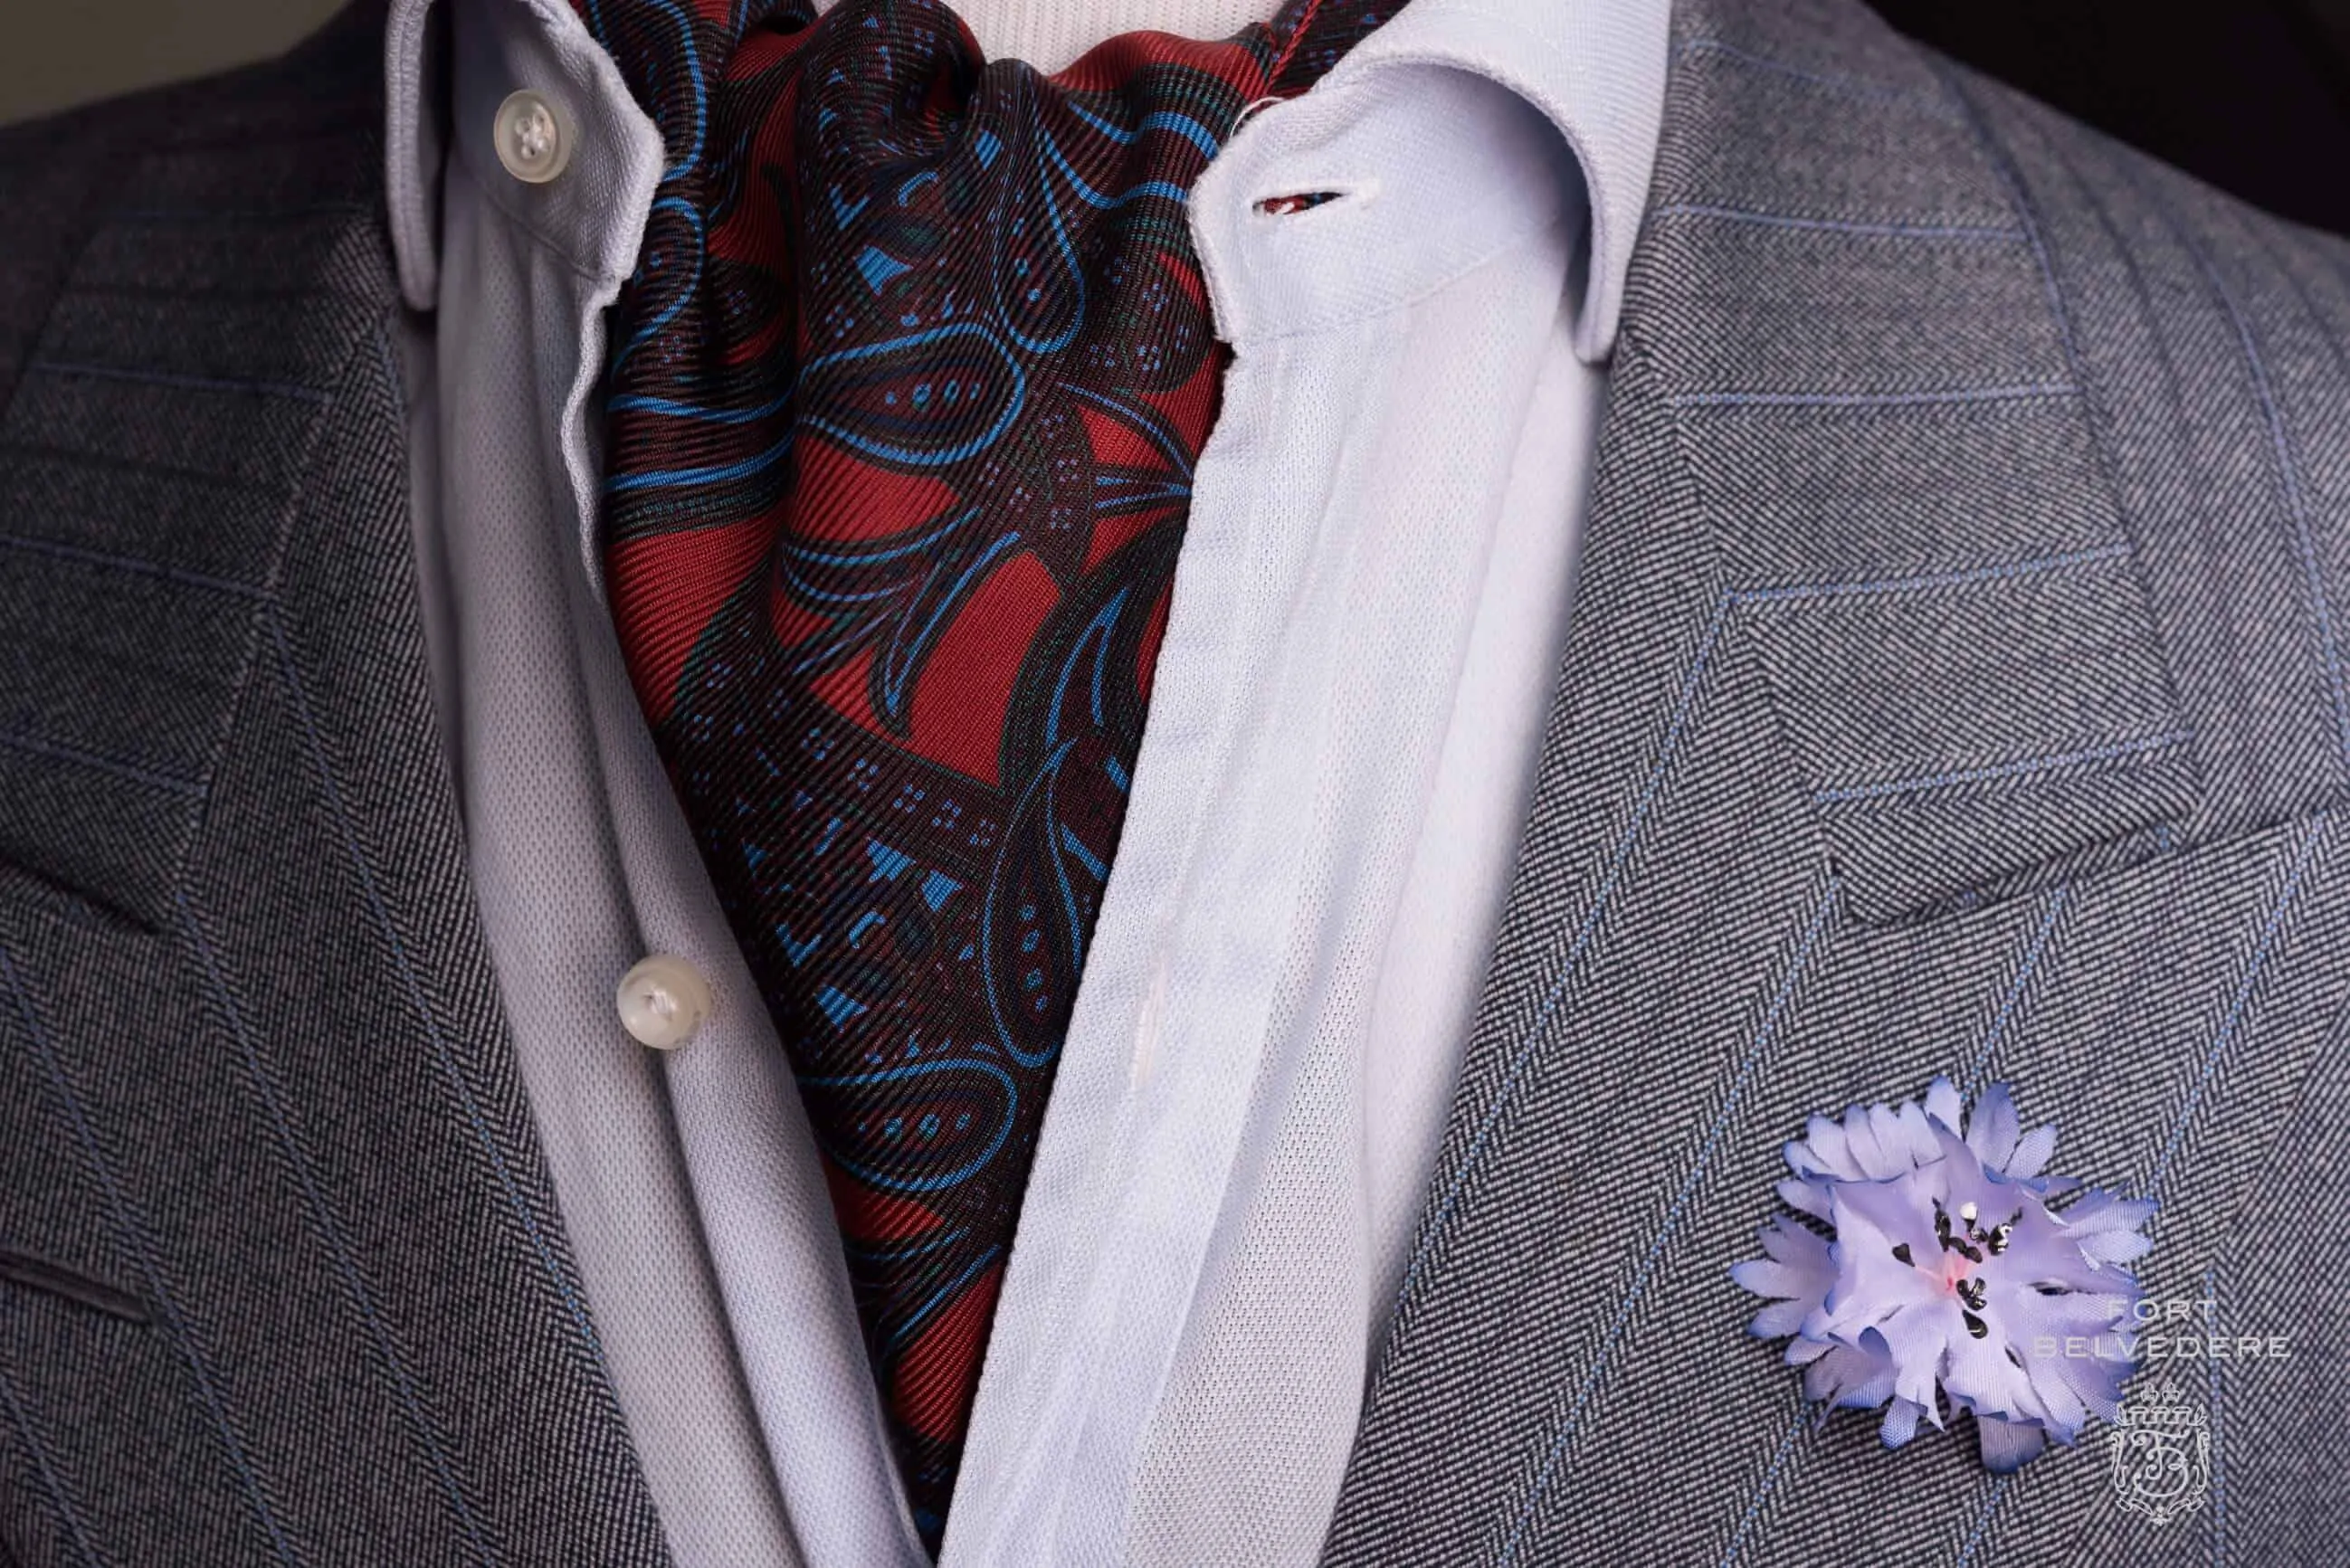 Ascot tie: how to wear it? - Fashion Details